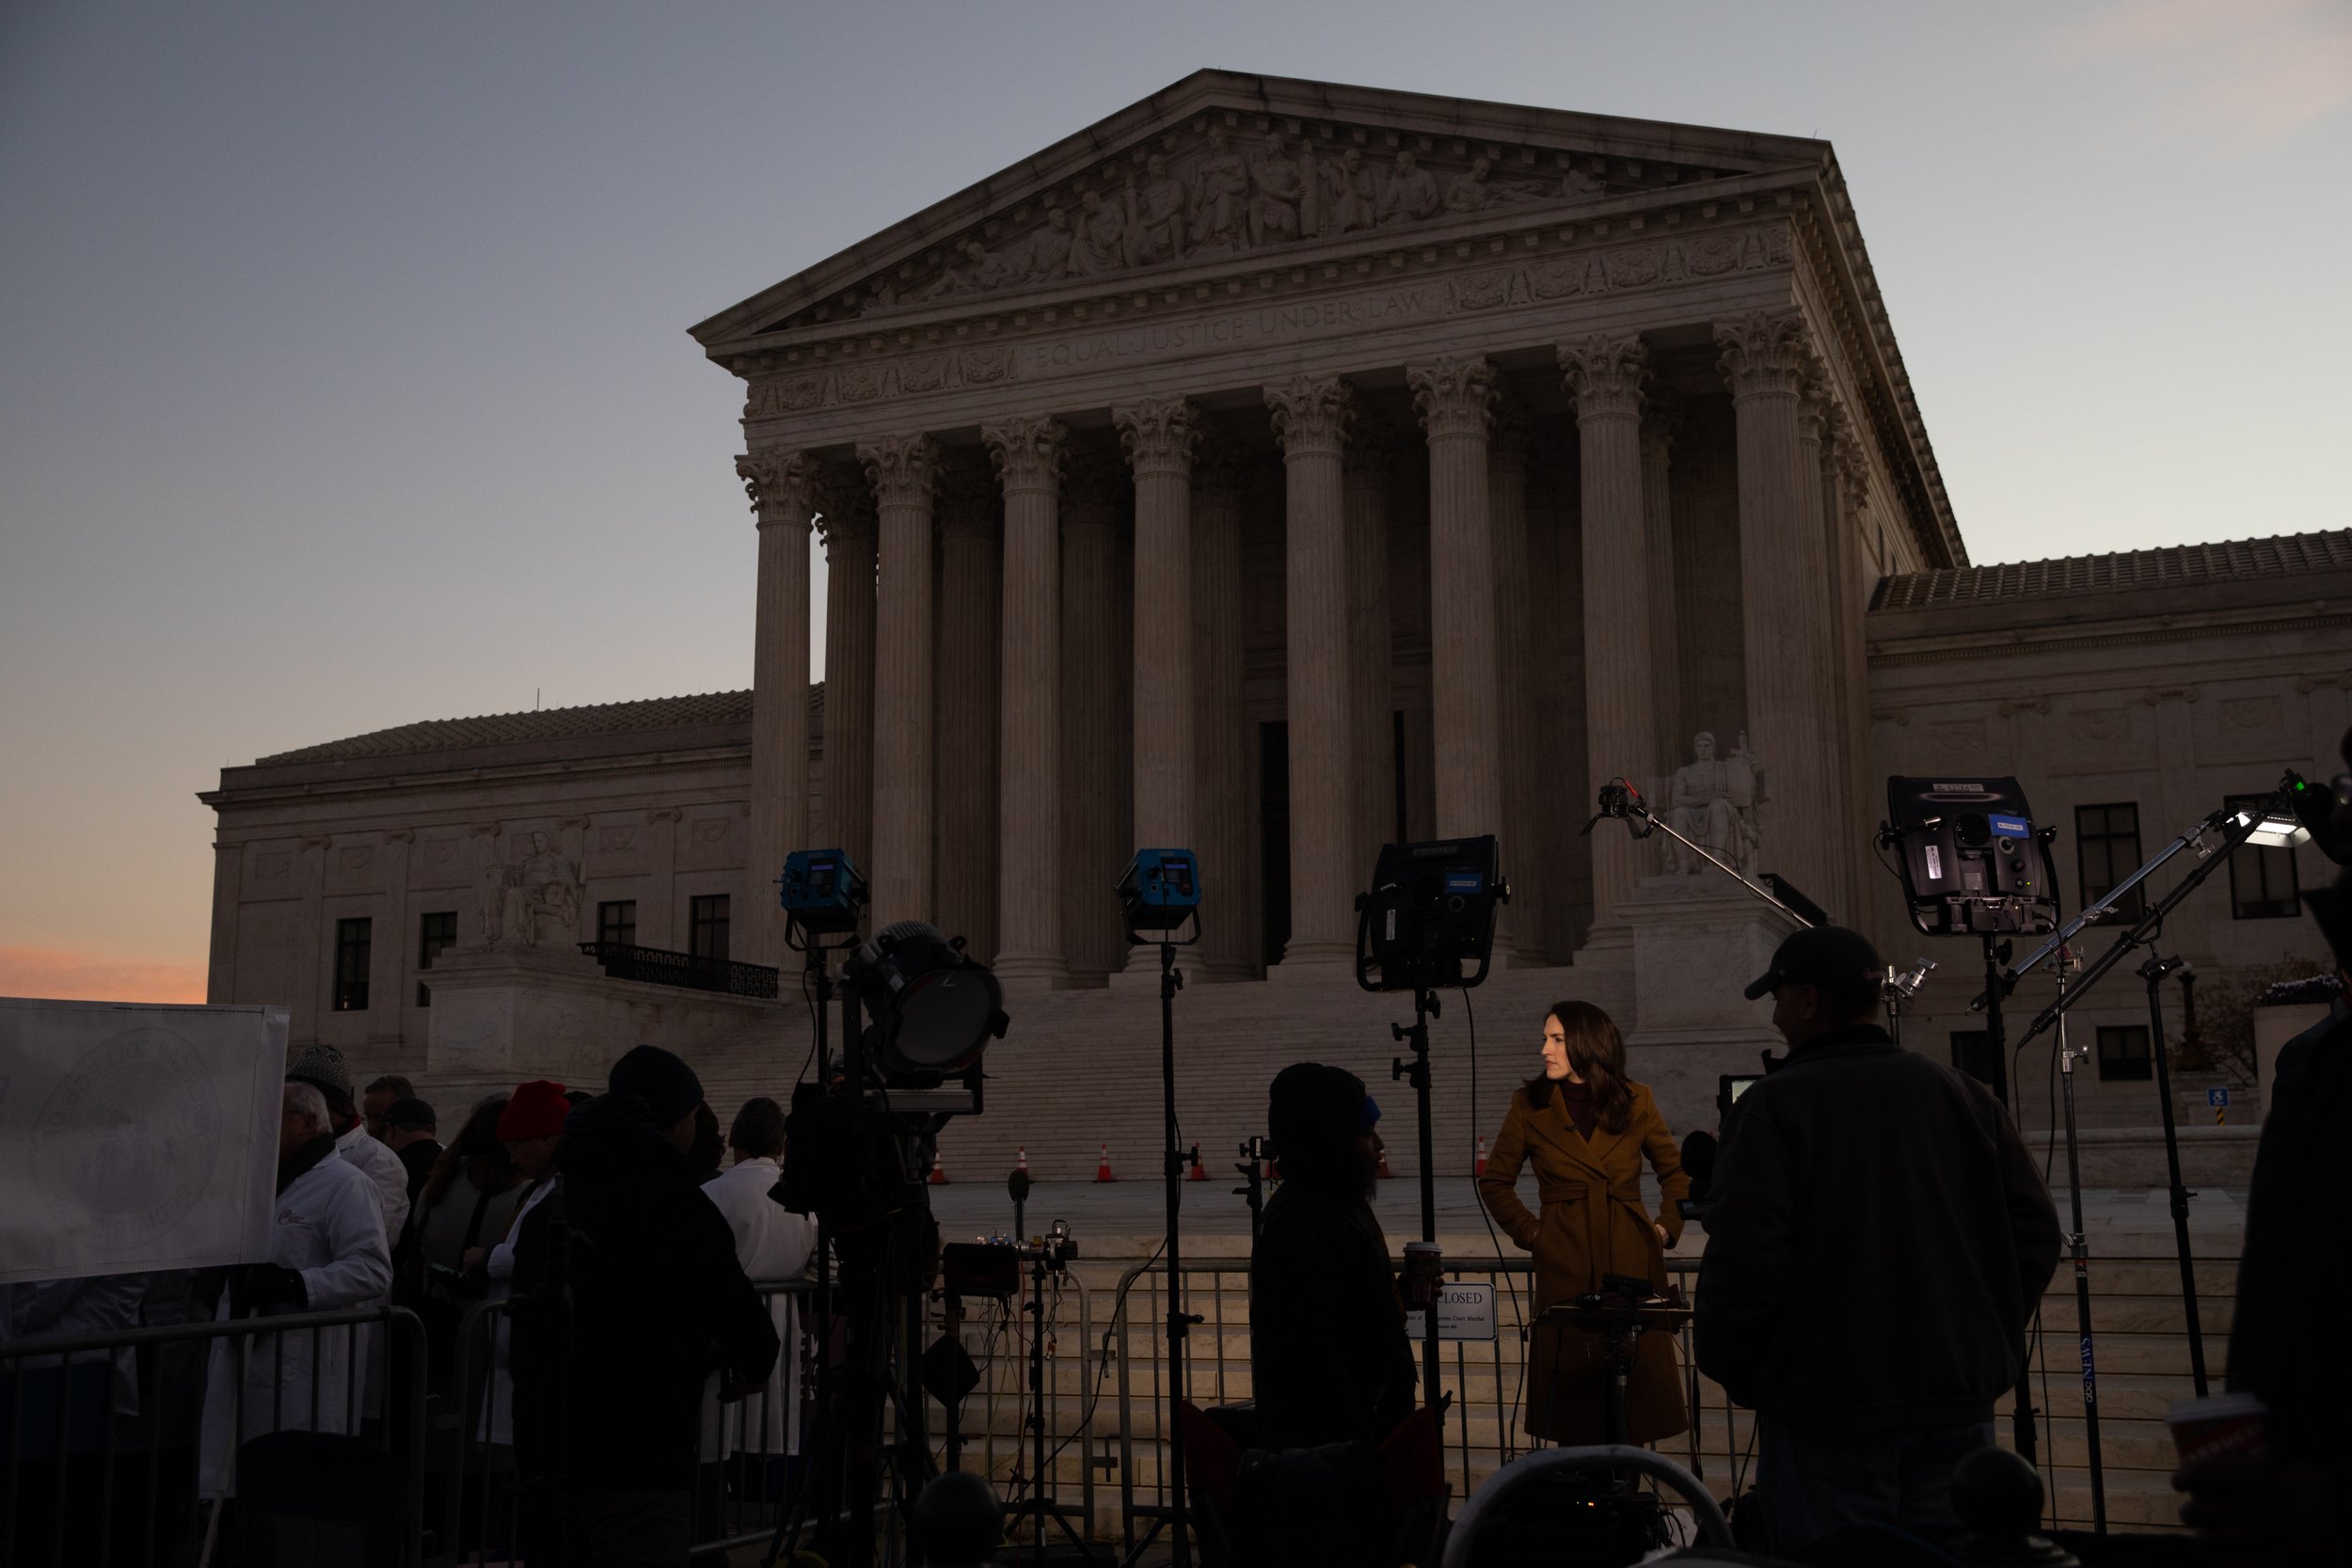  News organizations gather outside the U.S. Supreme Court in Washington, D.C., U.S., on Wednesday, Dec. 1, 2021. The Supreme Court's conservatives suggested they are poised to slash abortion rights and uphold Mississippi's ban on the procedure after 